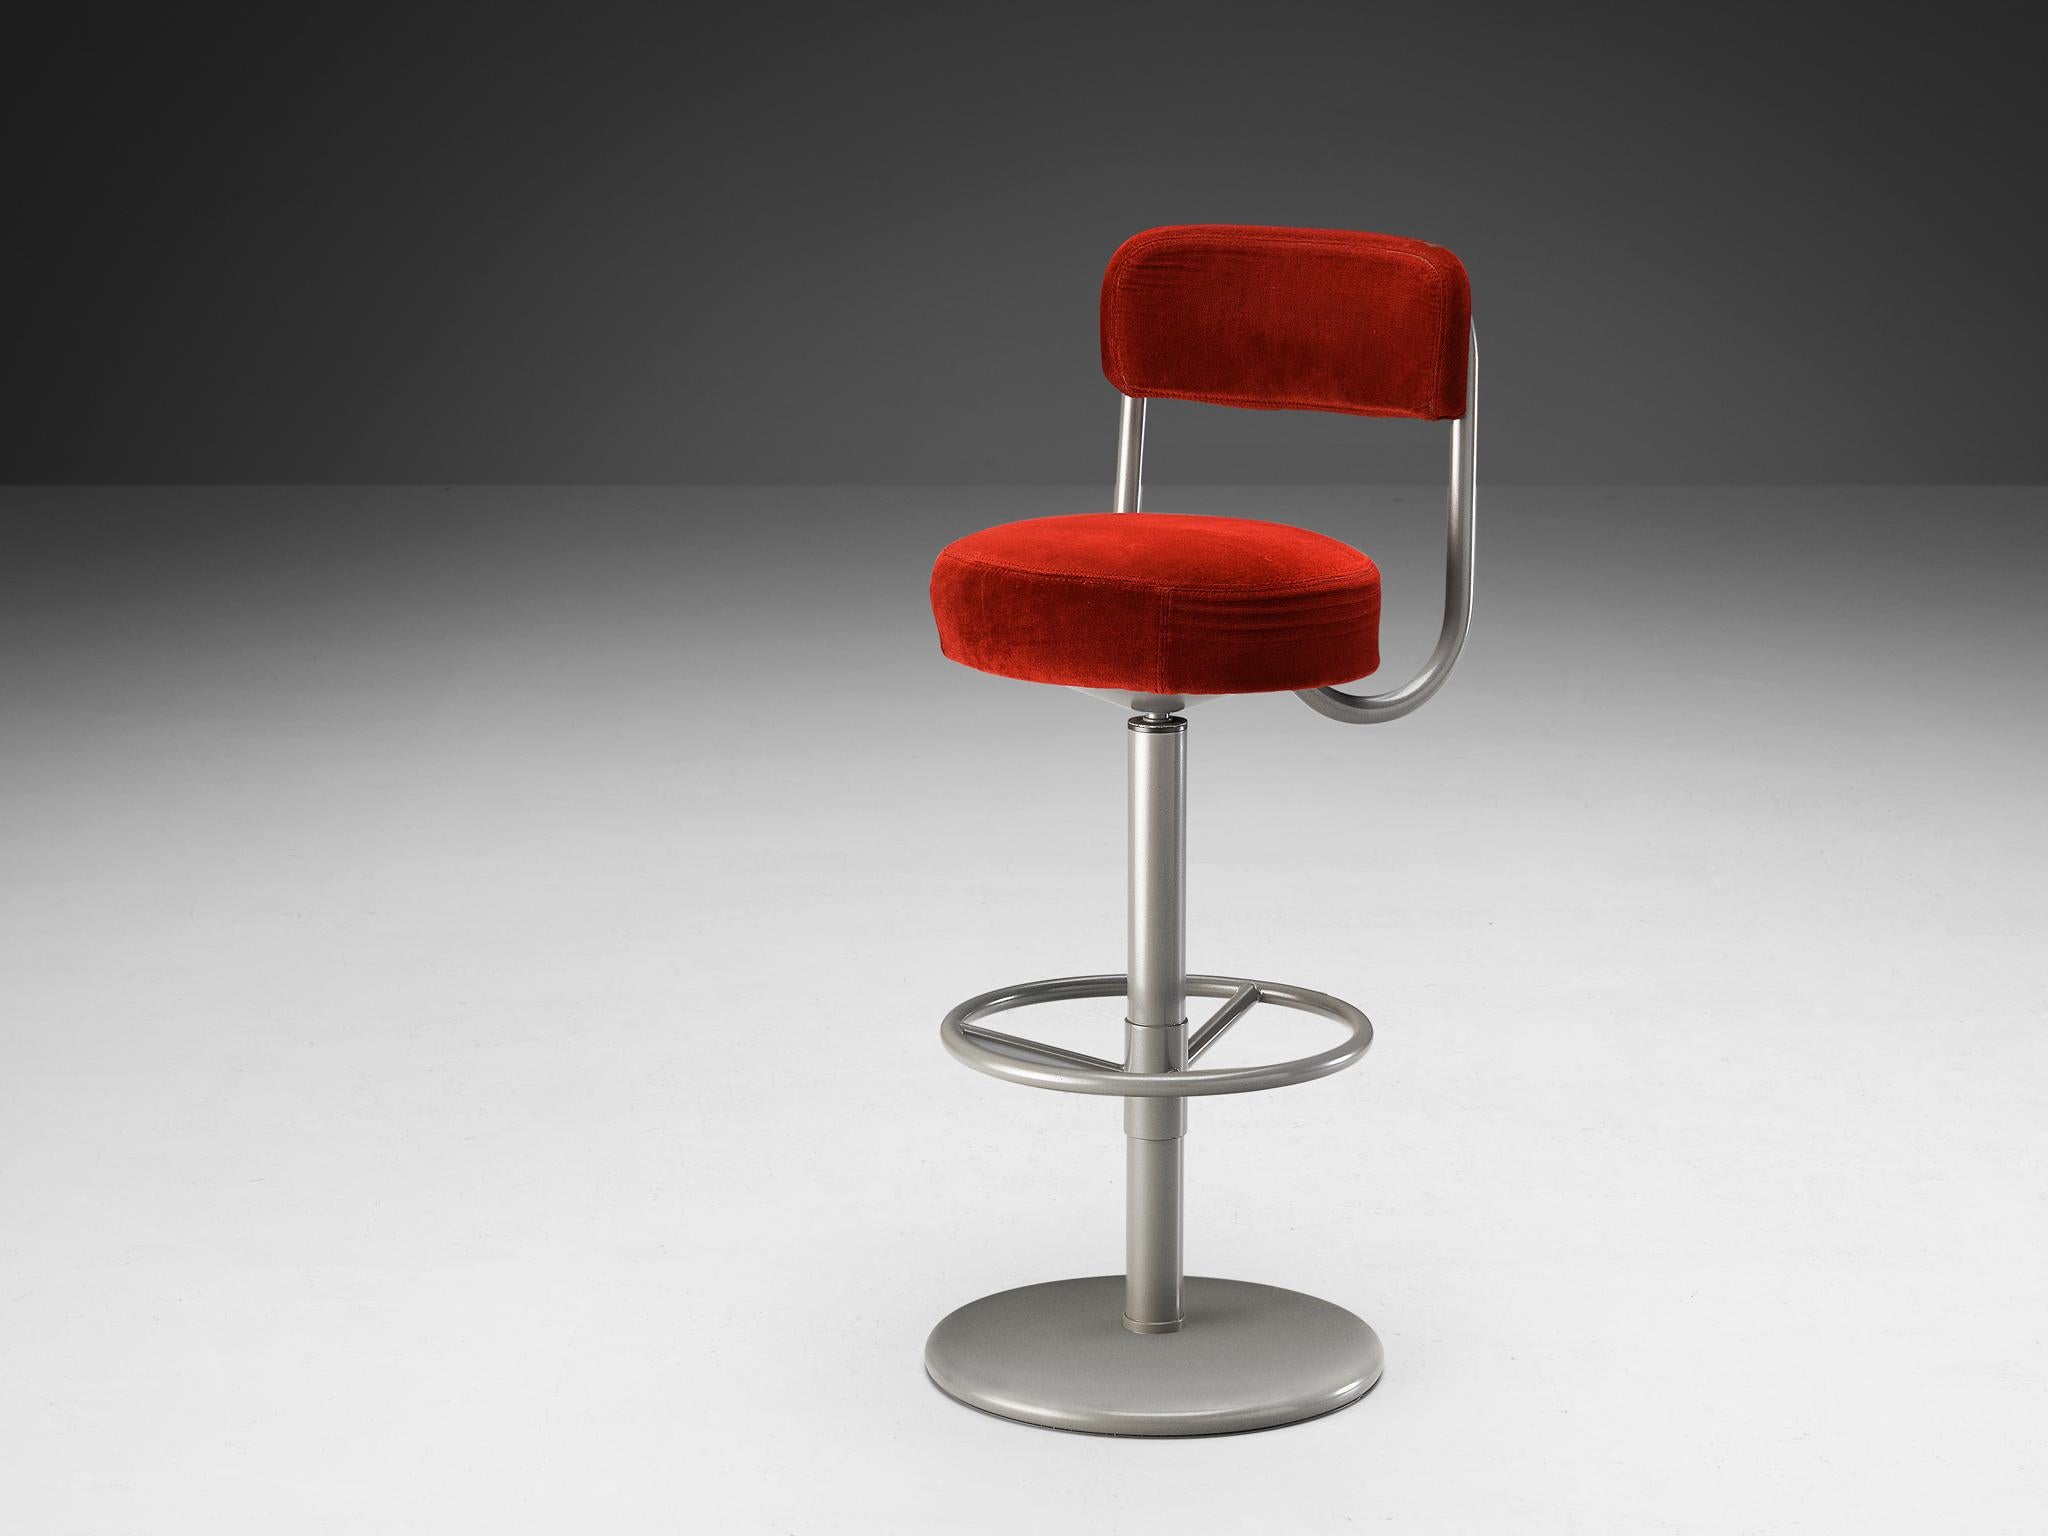 Börje Johanson for Johanson Design, barstool as part of 'Johanson Jupiter Collection', metal, leatherette, Sweden, 1970s.

Highly comfortable high barstool in red velvet upholstery. Due to the solid seat and back, these chairs provide a very